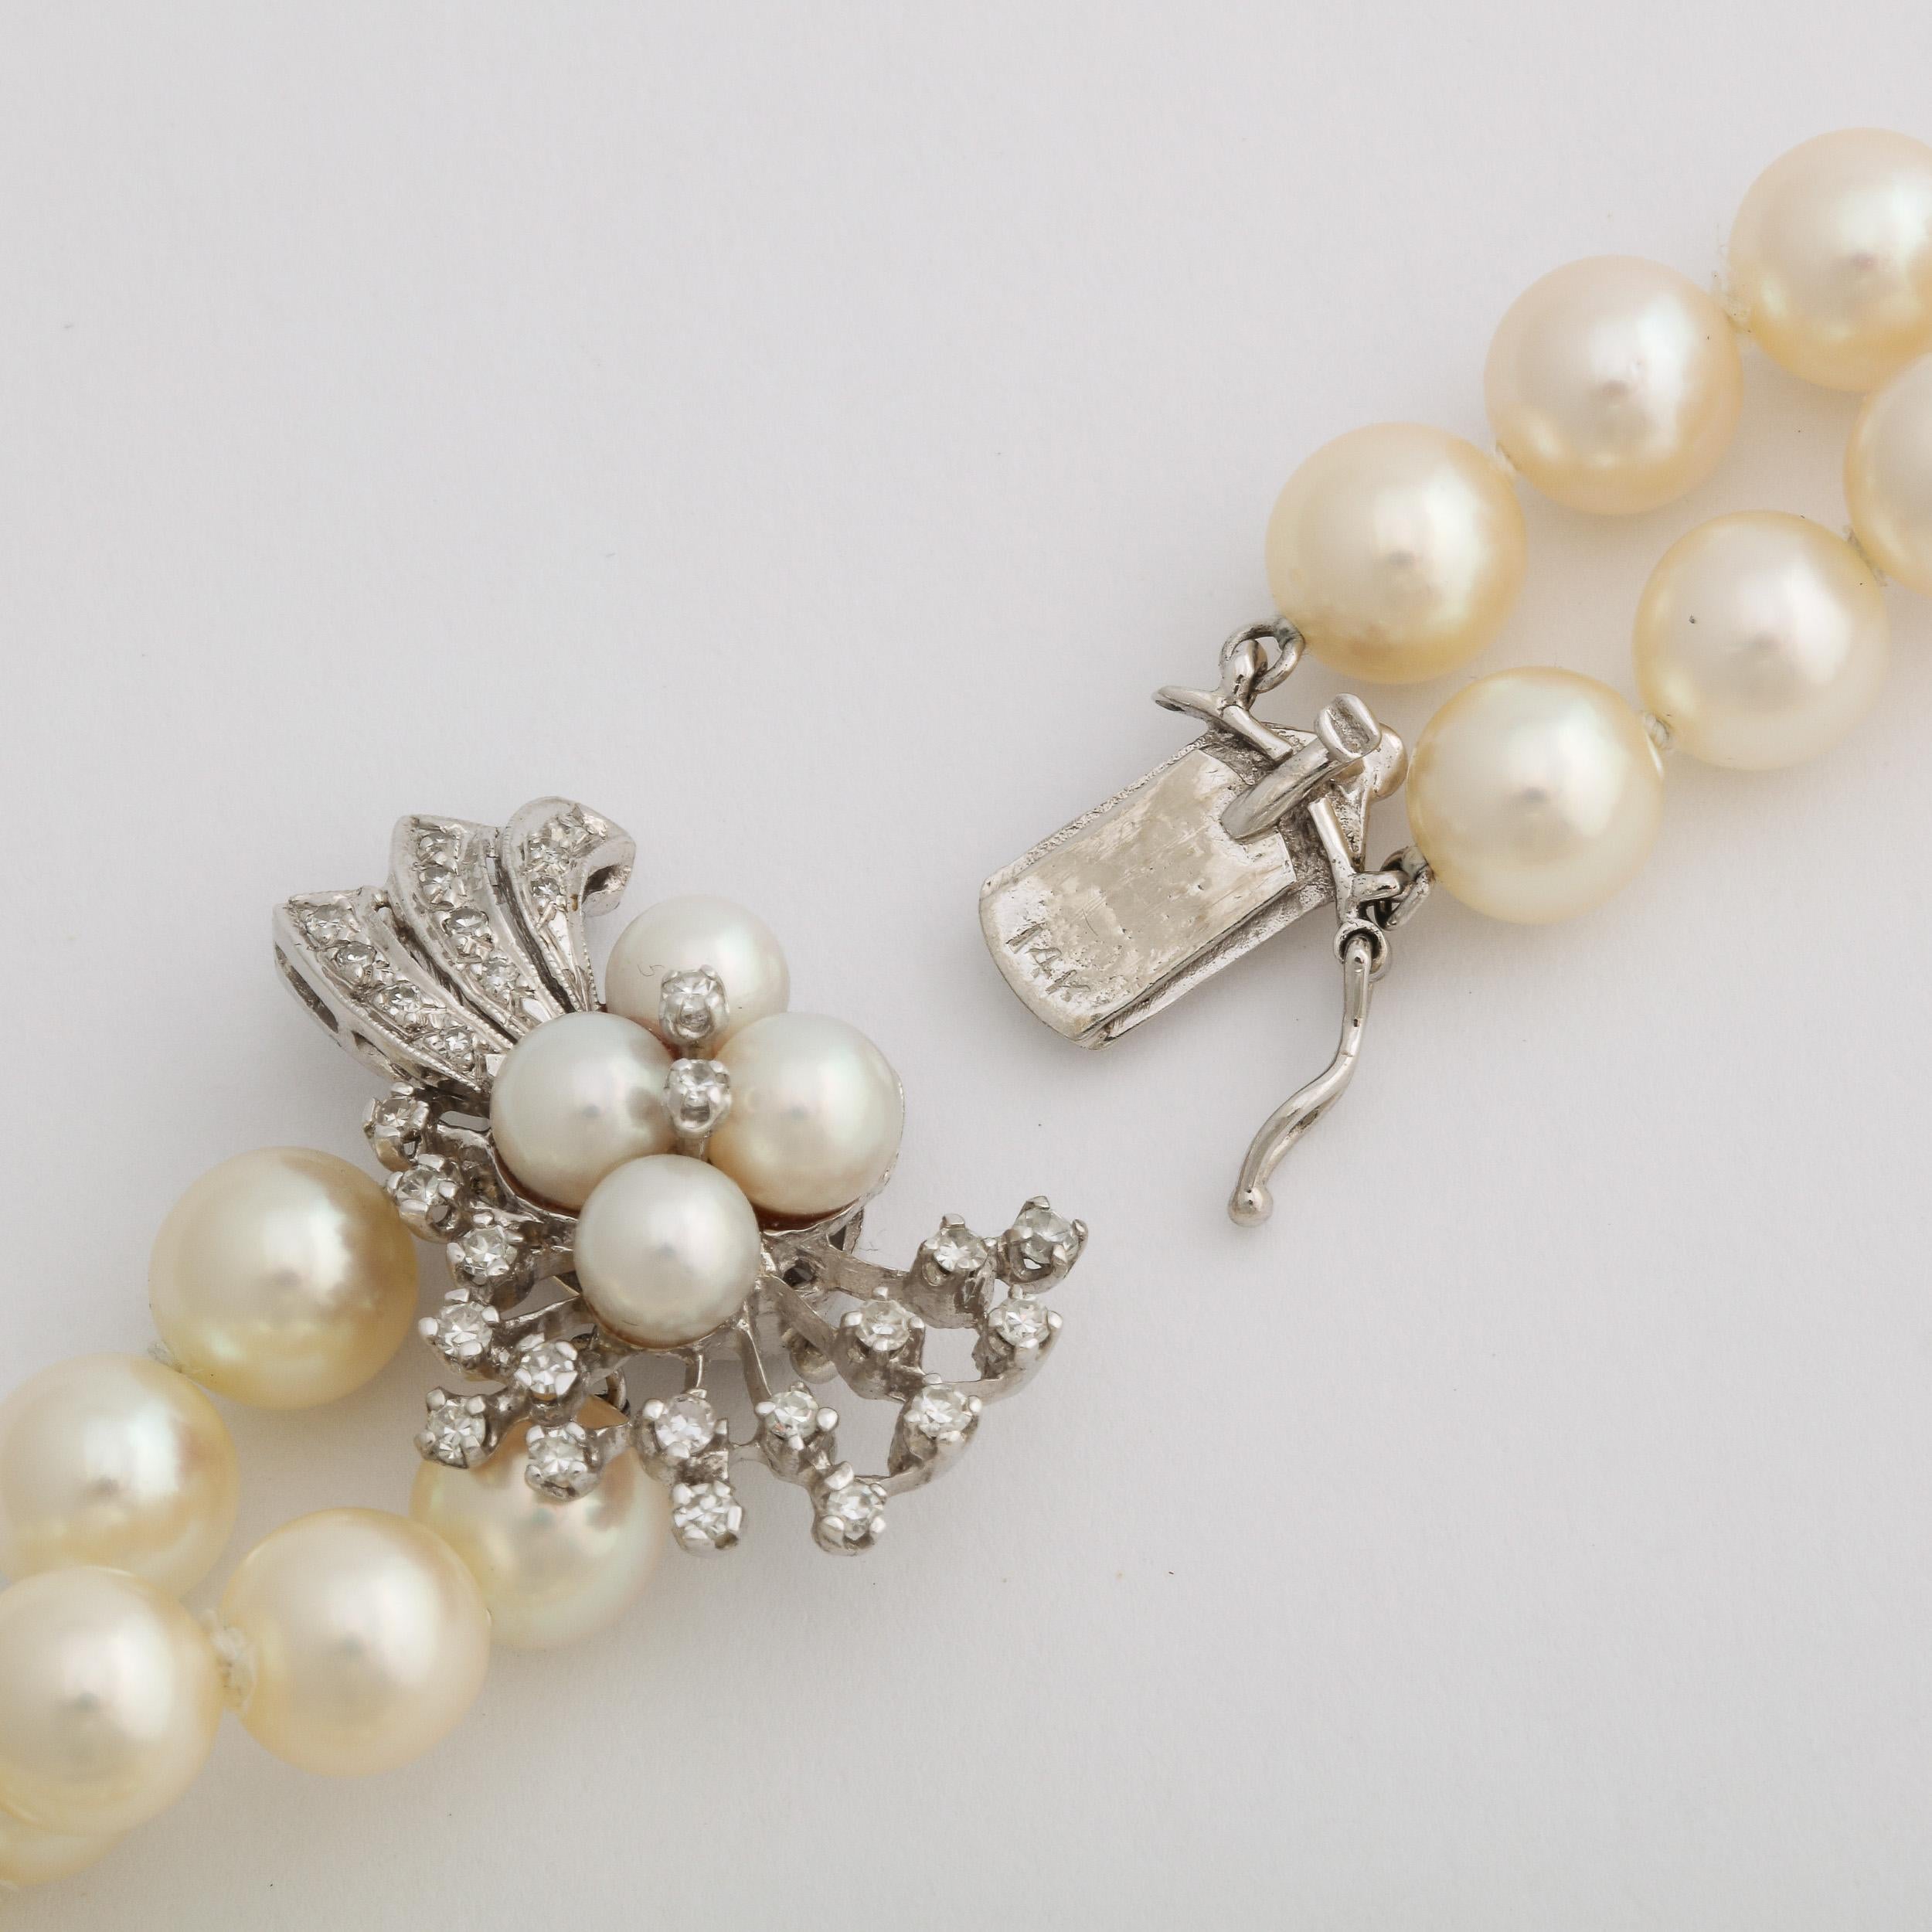 Double Strand Pearl Necklace with A White Gold , Diamond & Pearl Clasp For Sale 7